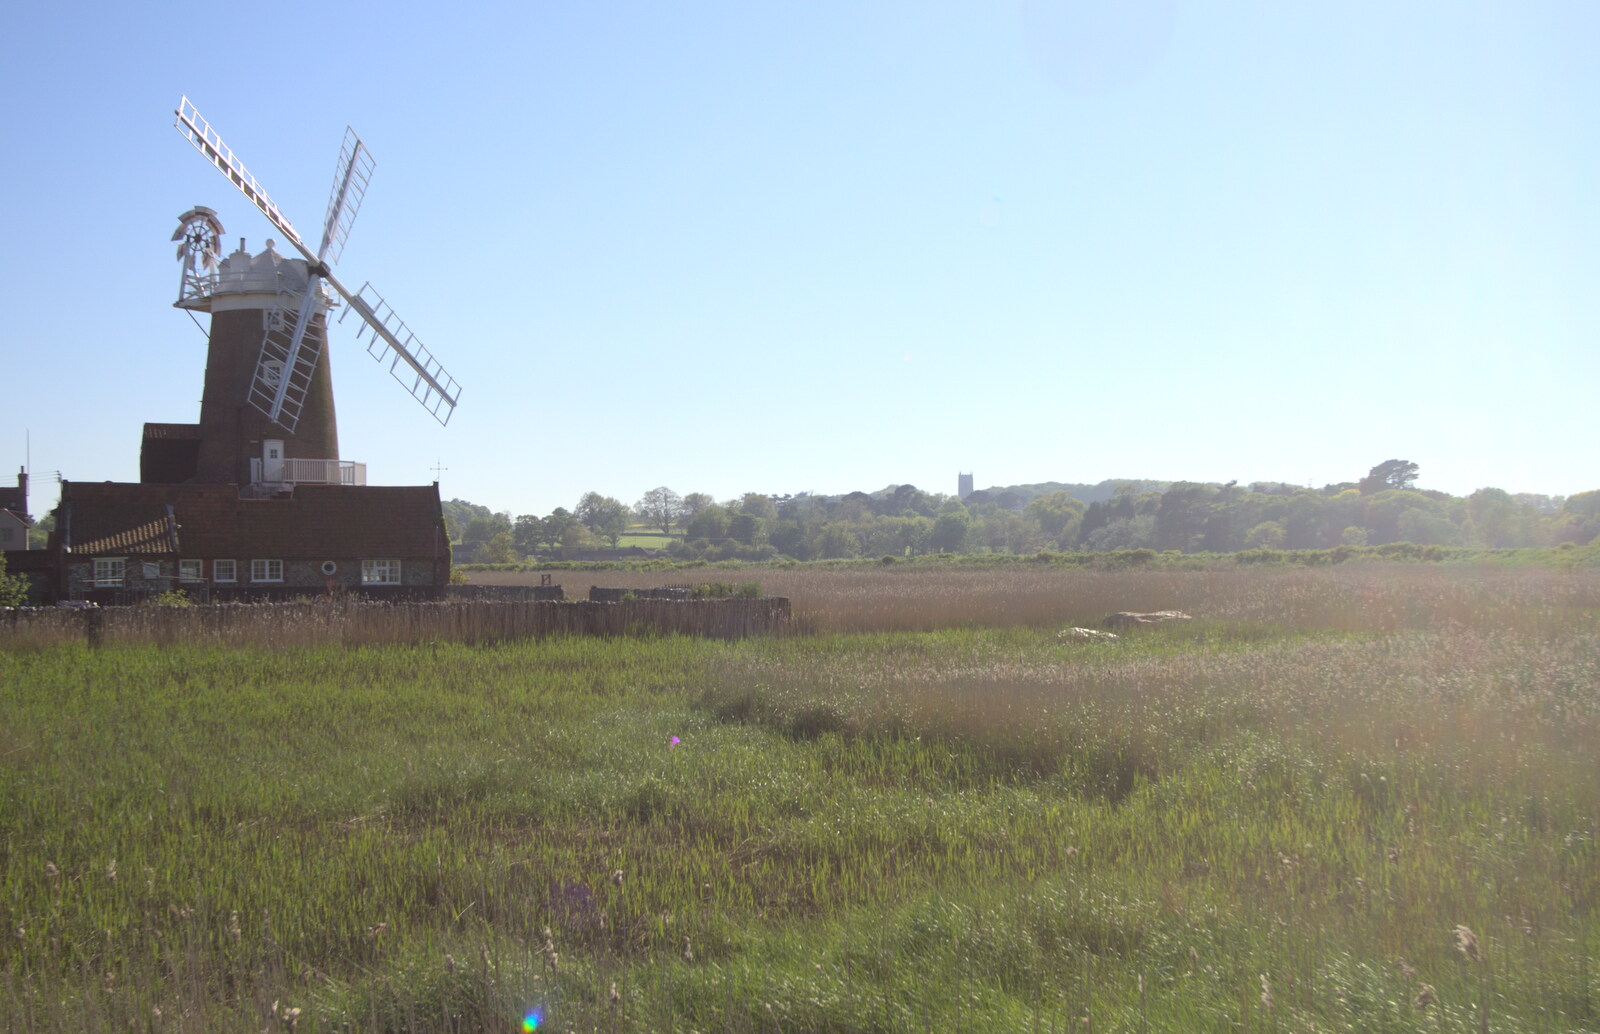 Cley salt marshes and the windmill from The BSCC at Needham, and a Birthday By The Sea, Cley, Norfolk - 26th May 2012